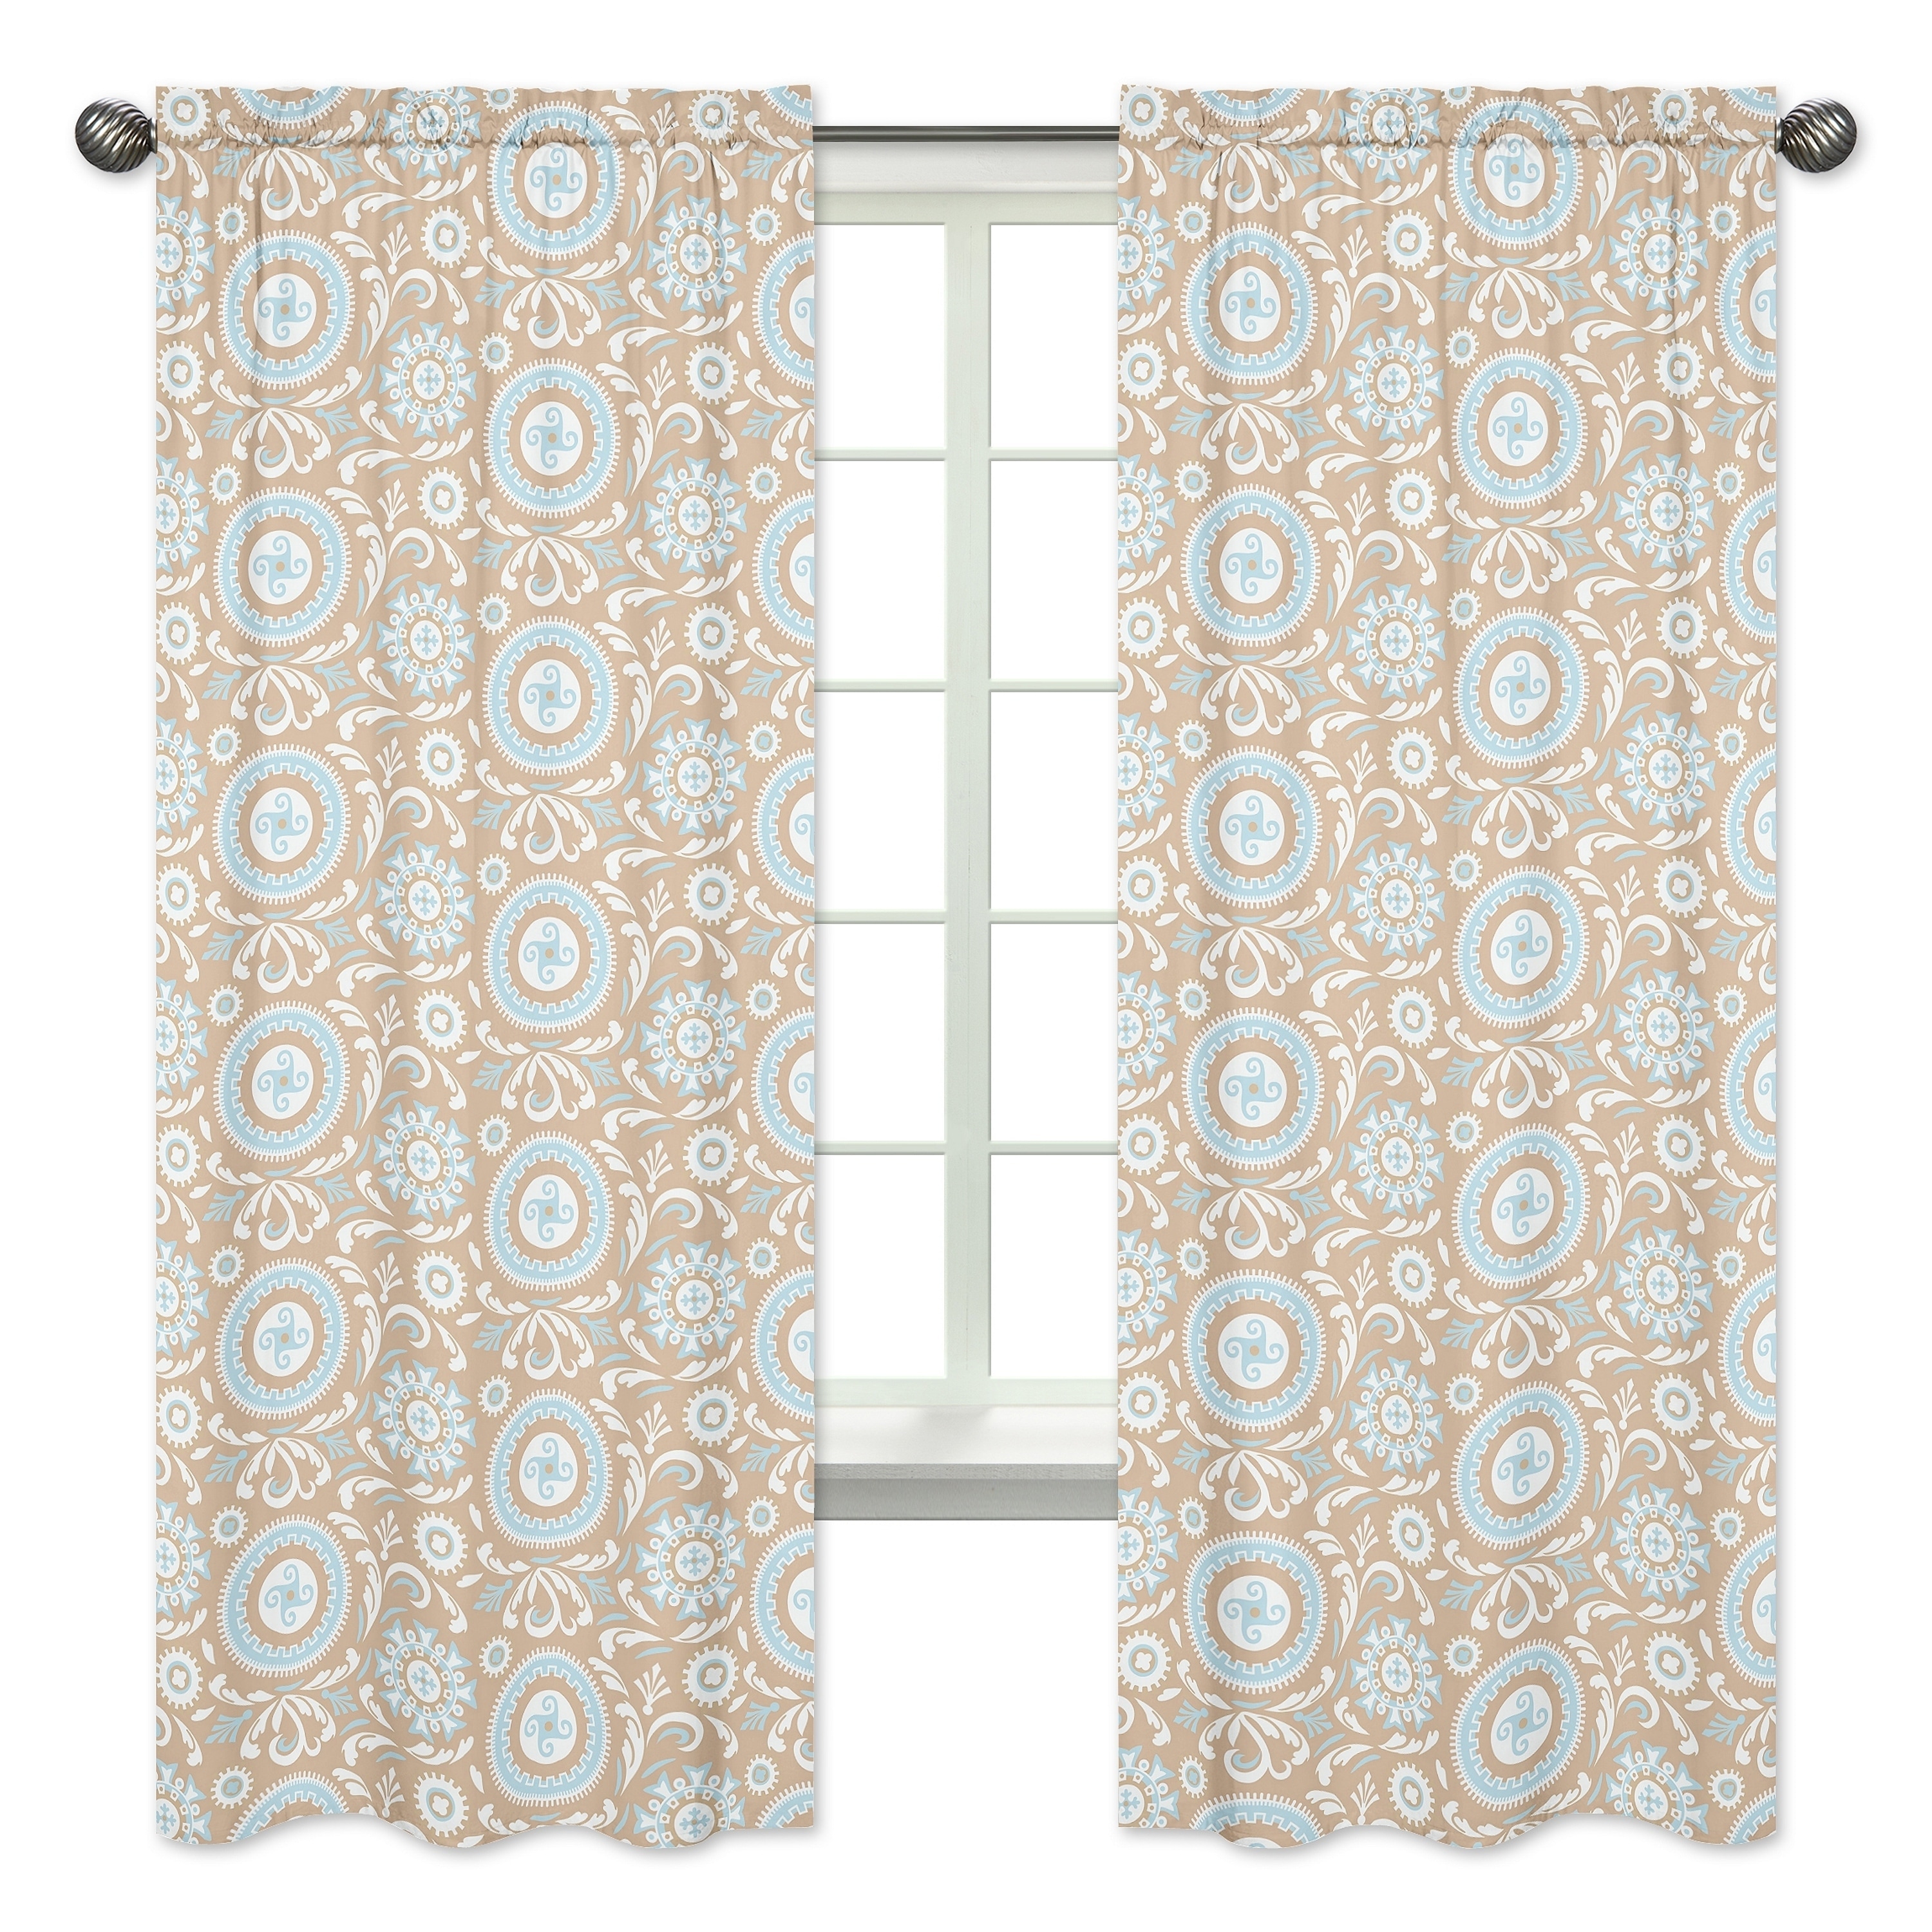 Blue/taupe Hayden 84 Inch Curtainpanels (set Of 2) (Blue/taupe/whiteCurtain style Window panelConstruction Rod pocketPocket measures 1.5 inchesLining UnlinedDimensions 42 inches wide x 84 inches long each panelMaterial 100 percent cottonCare instruc